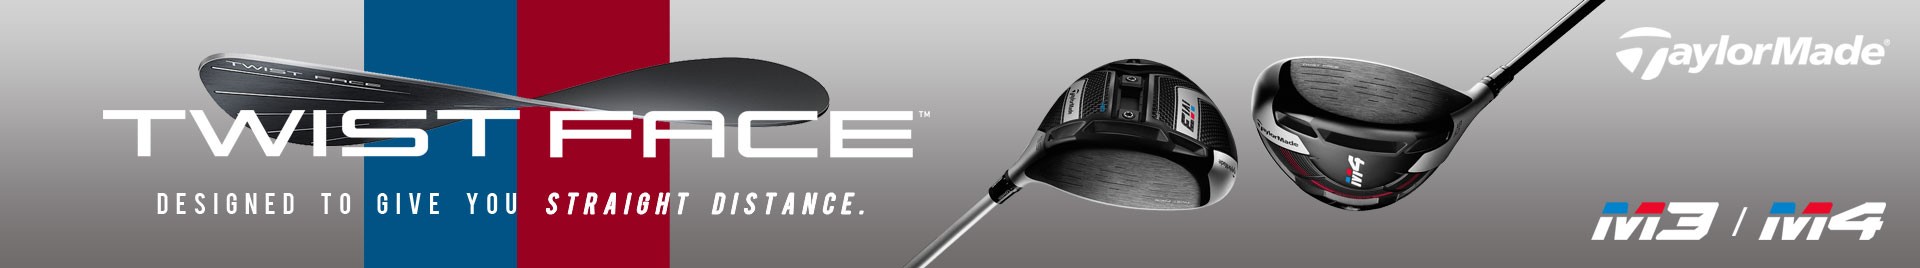 Taylormade M3 M4 Driver